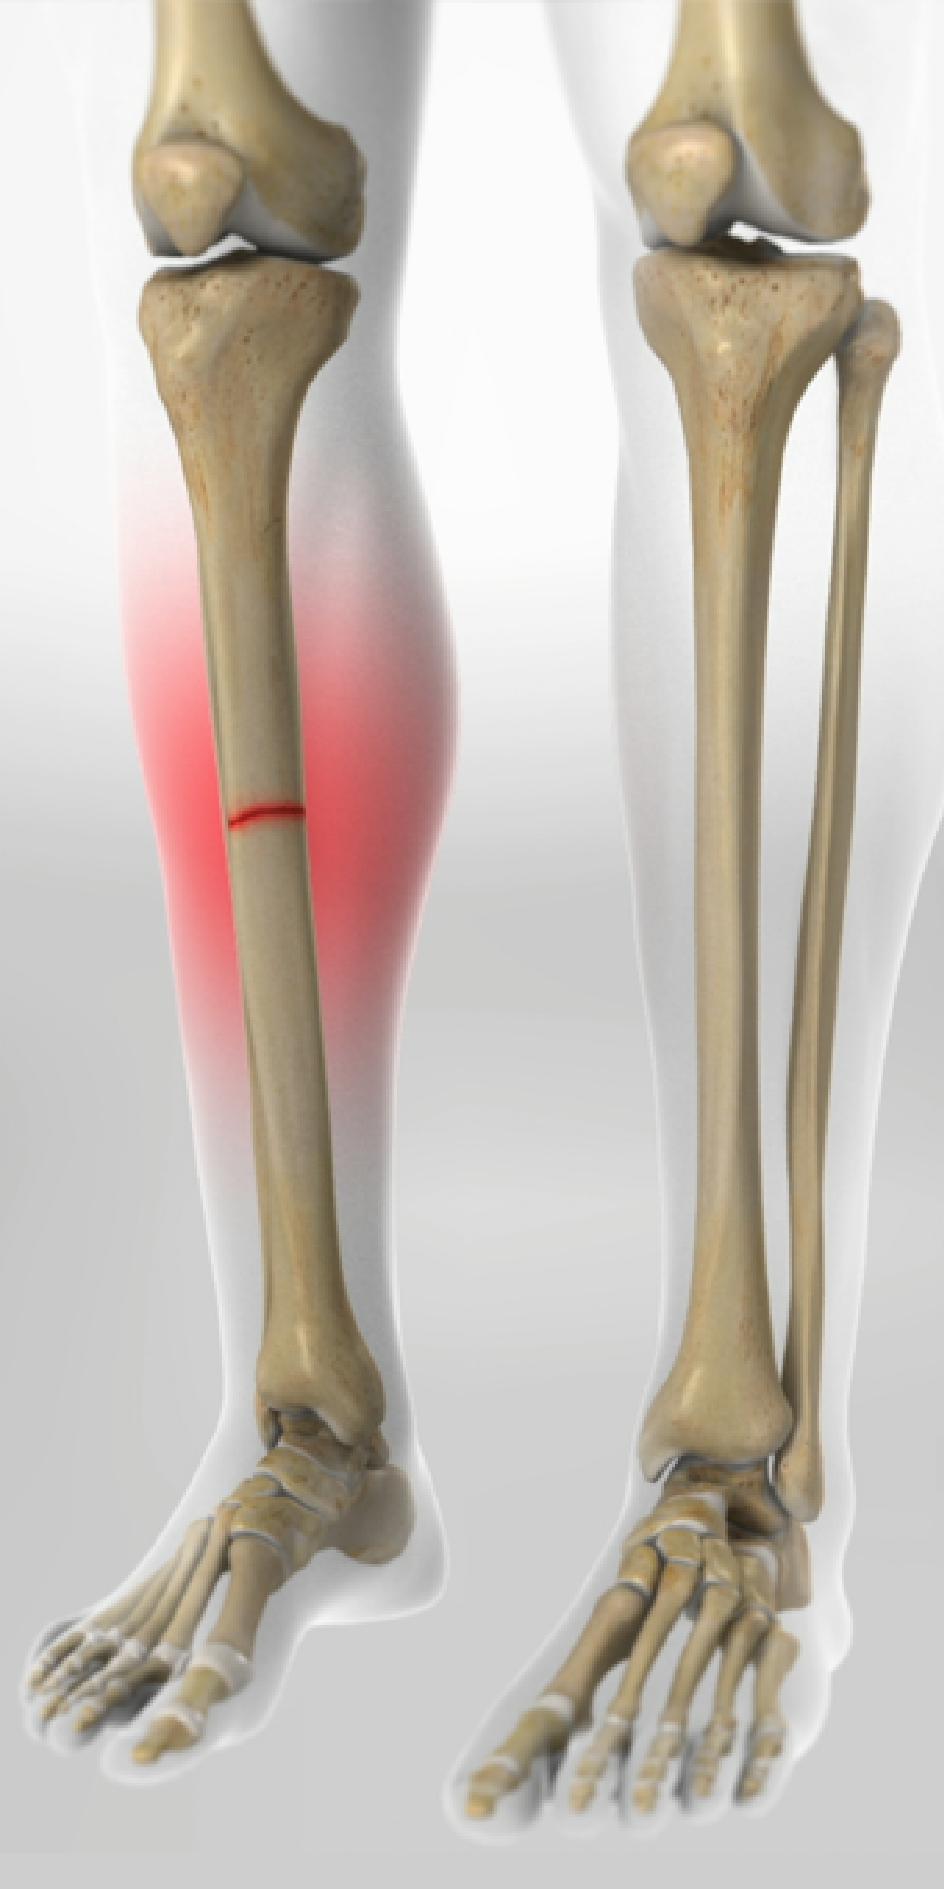 Tibial Fractures - Orthoriverside.com